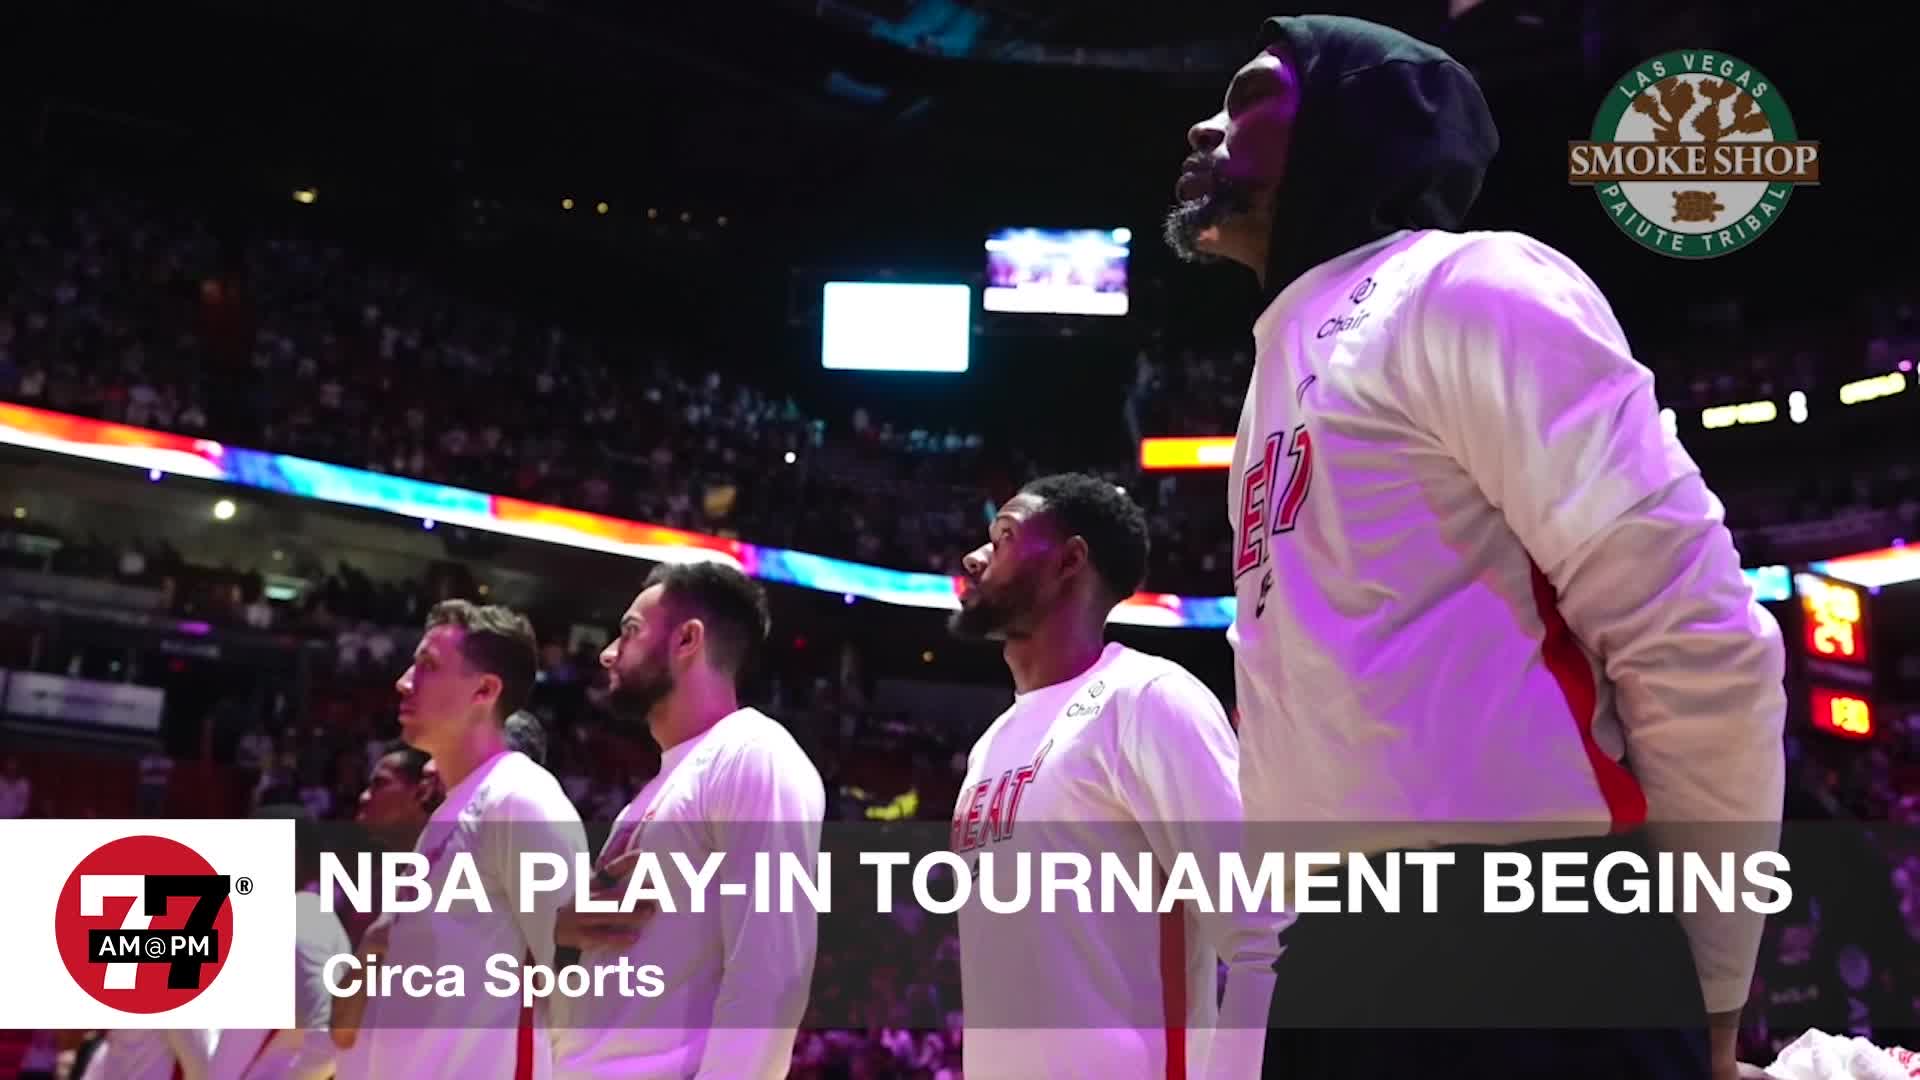 NBA play-in tournament begins